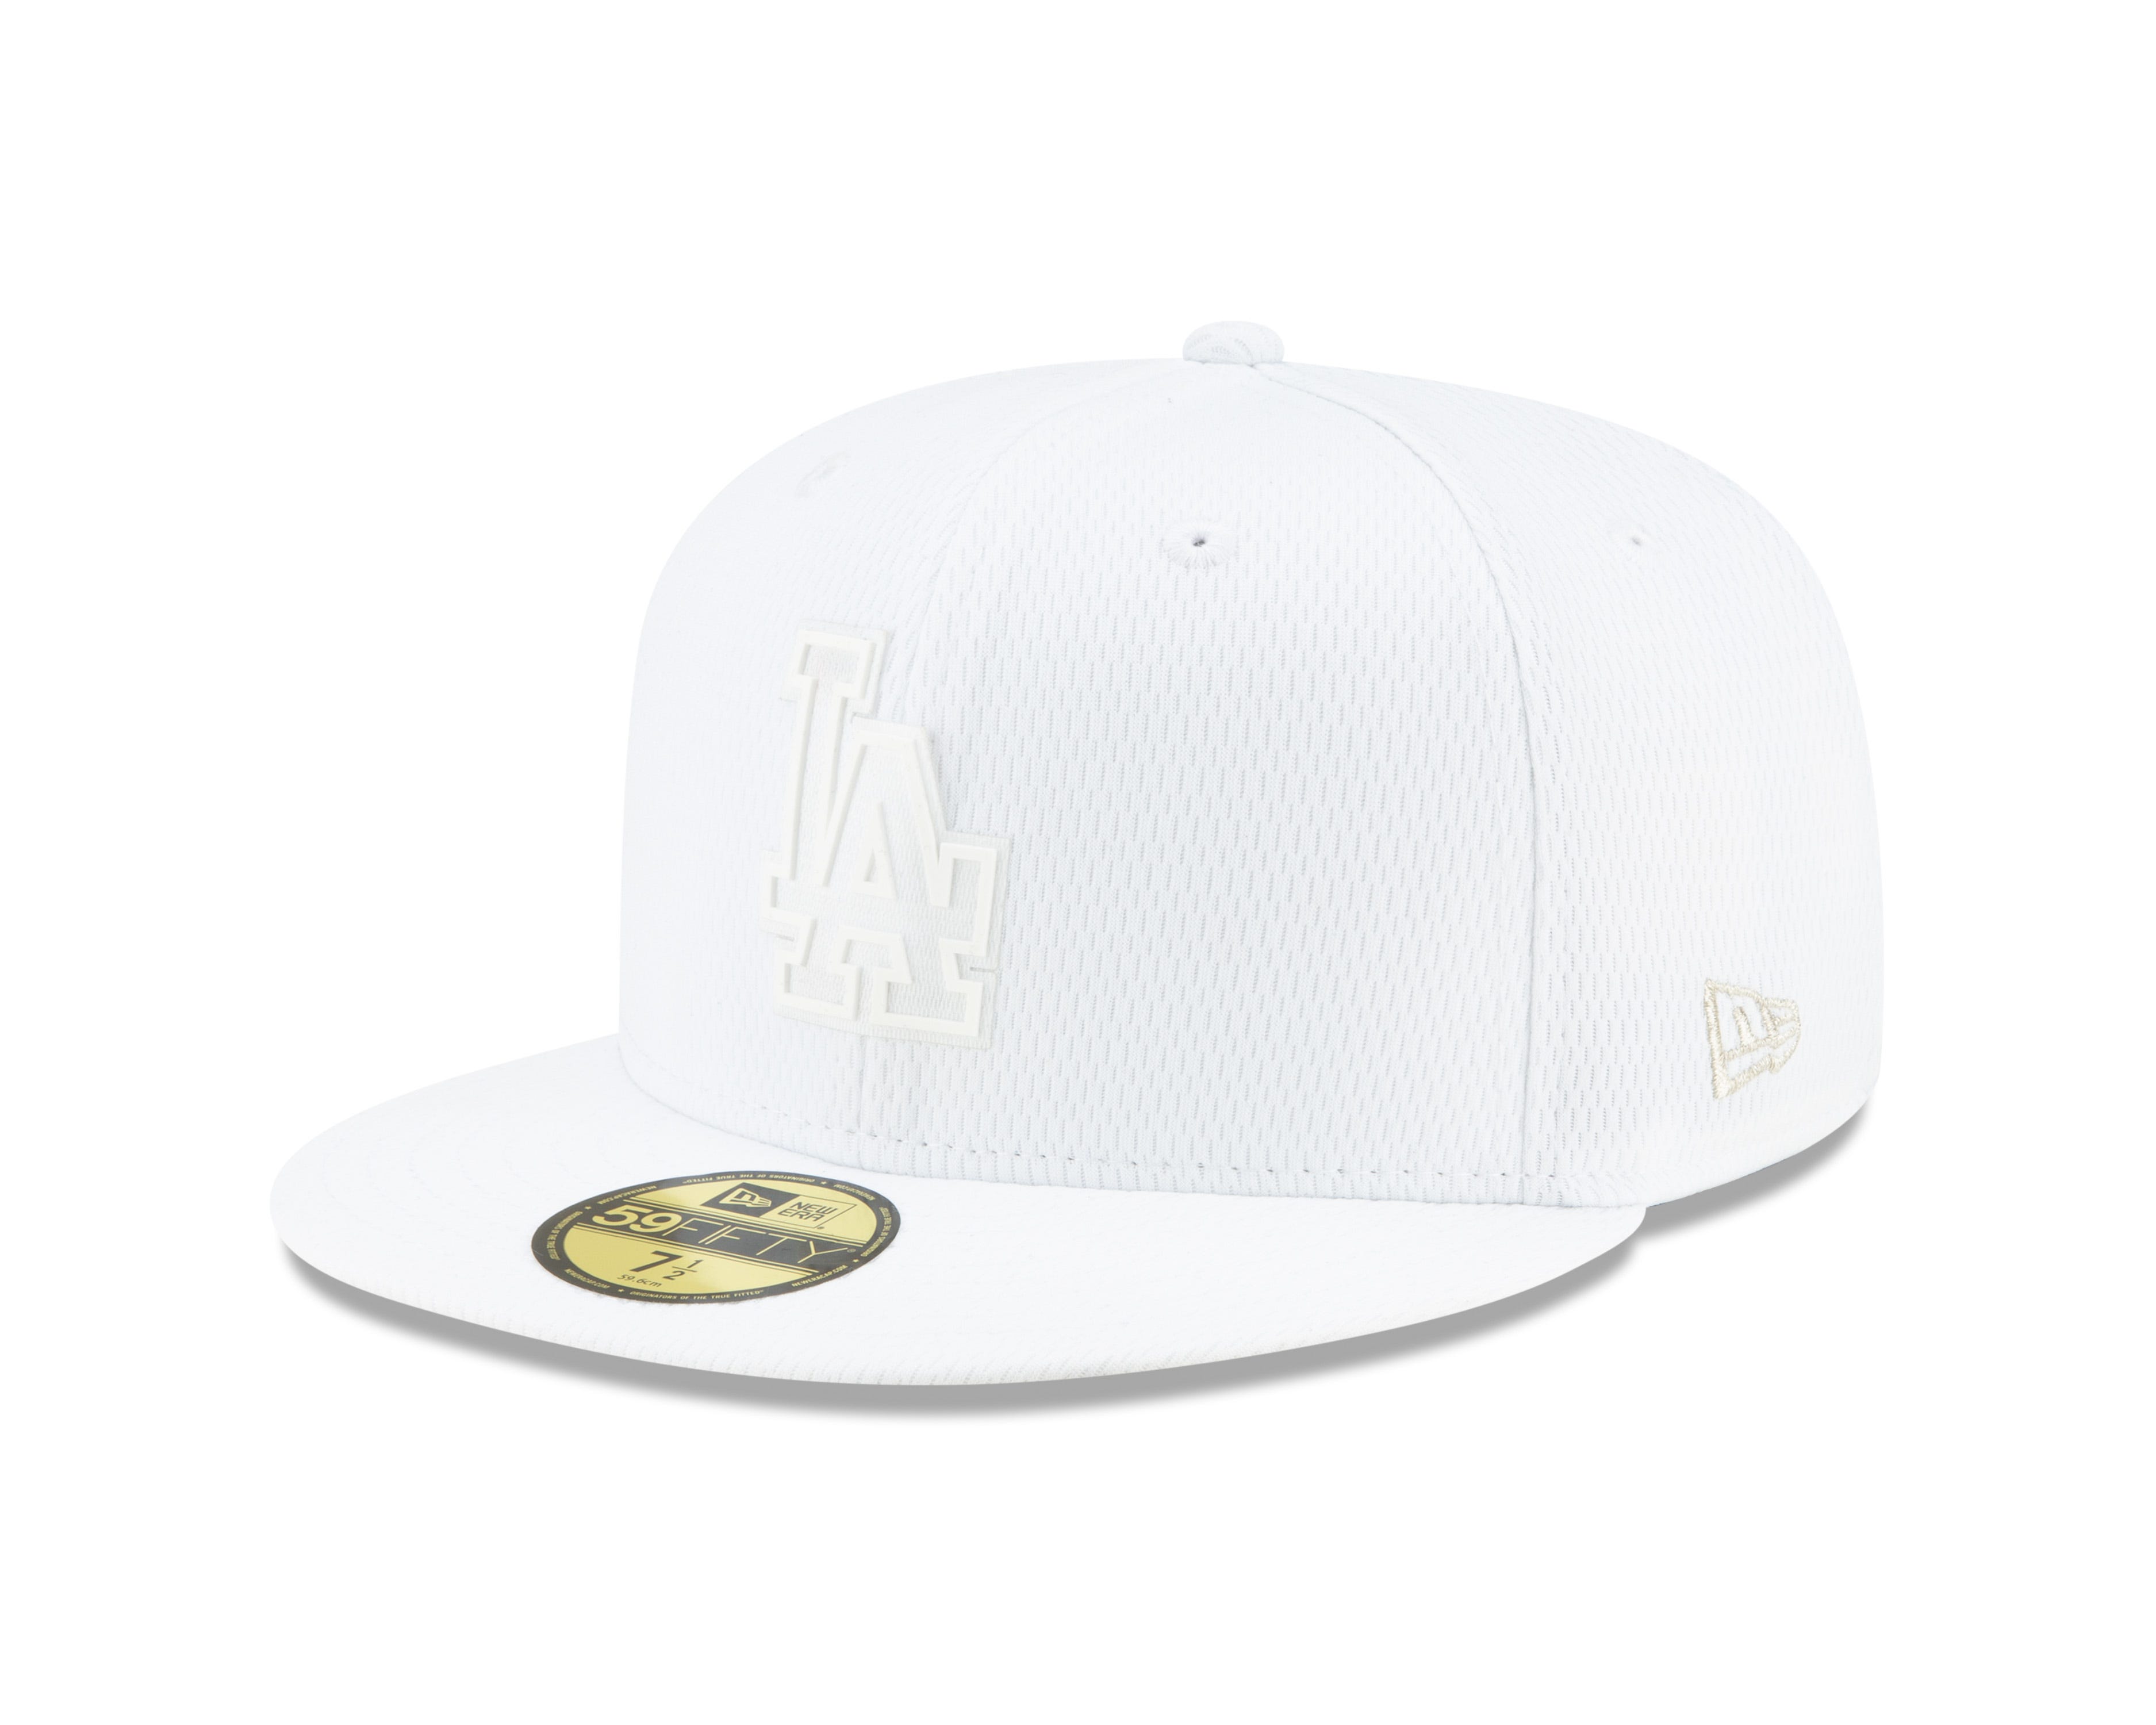 players weekend hats